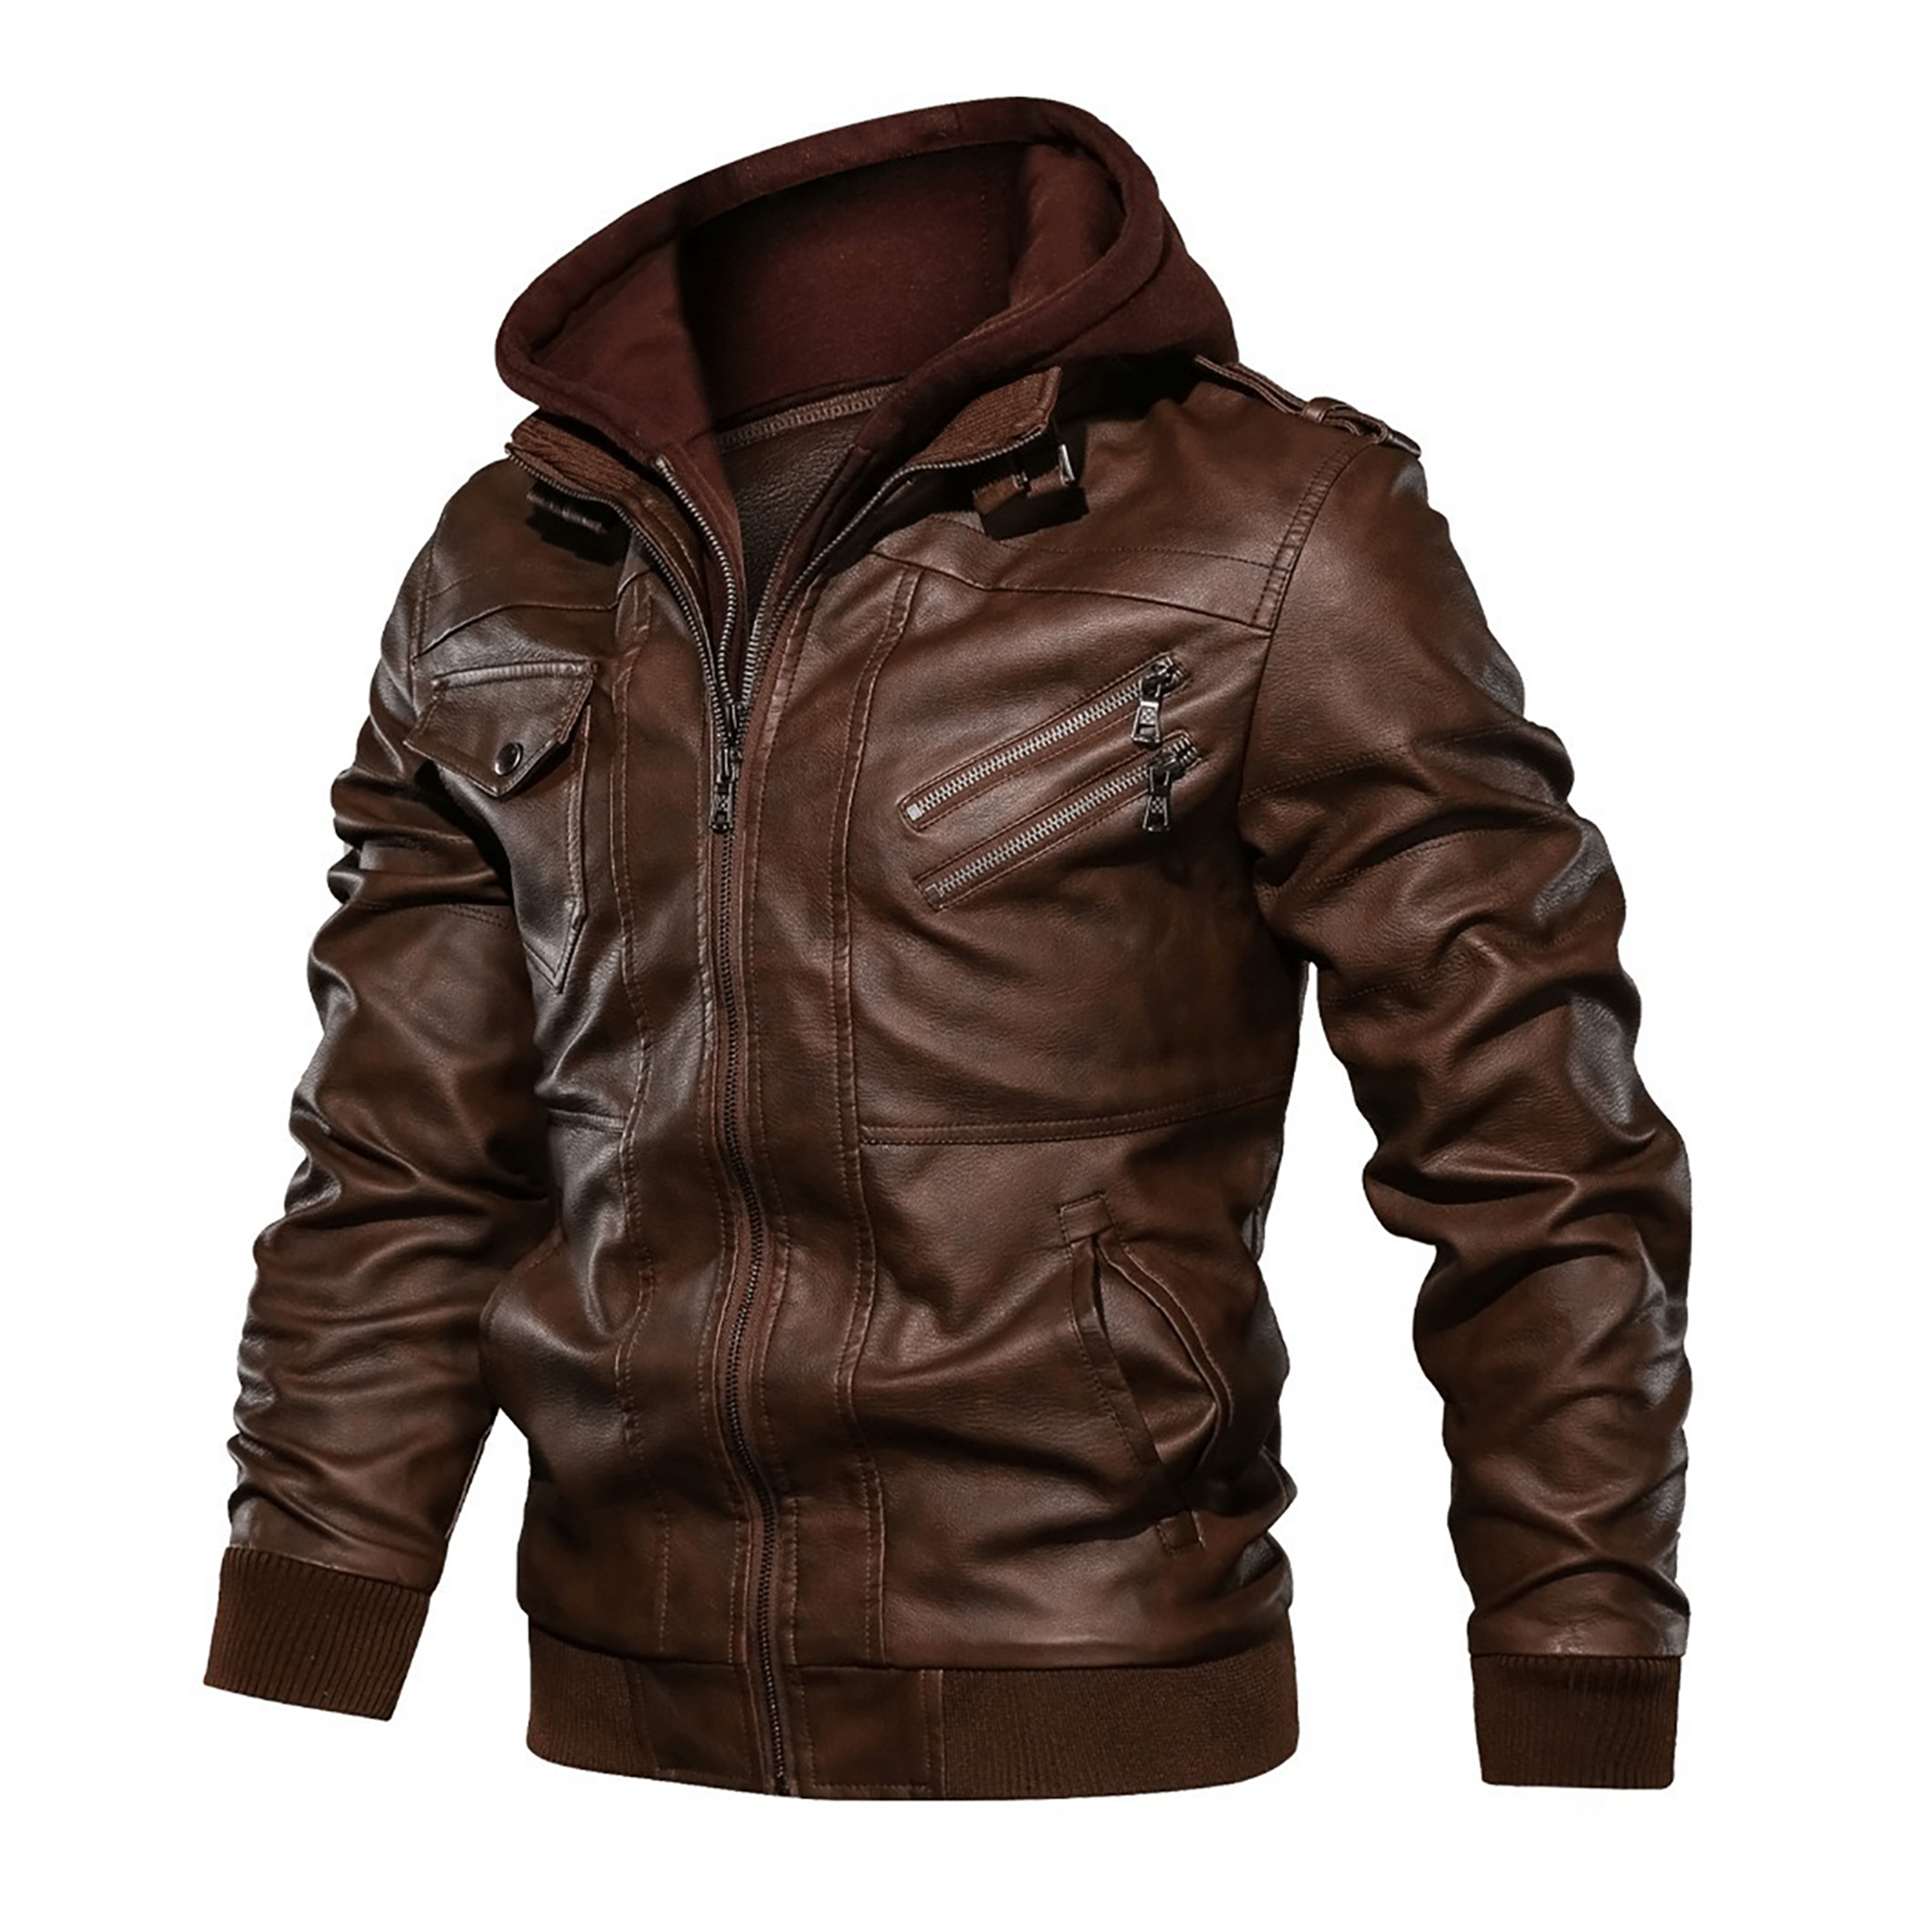 Top leather jackets and latest products 307